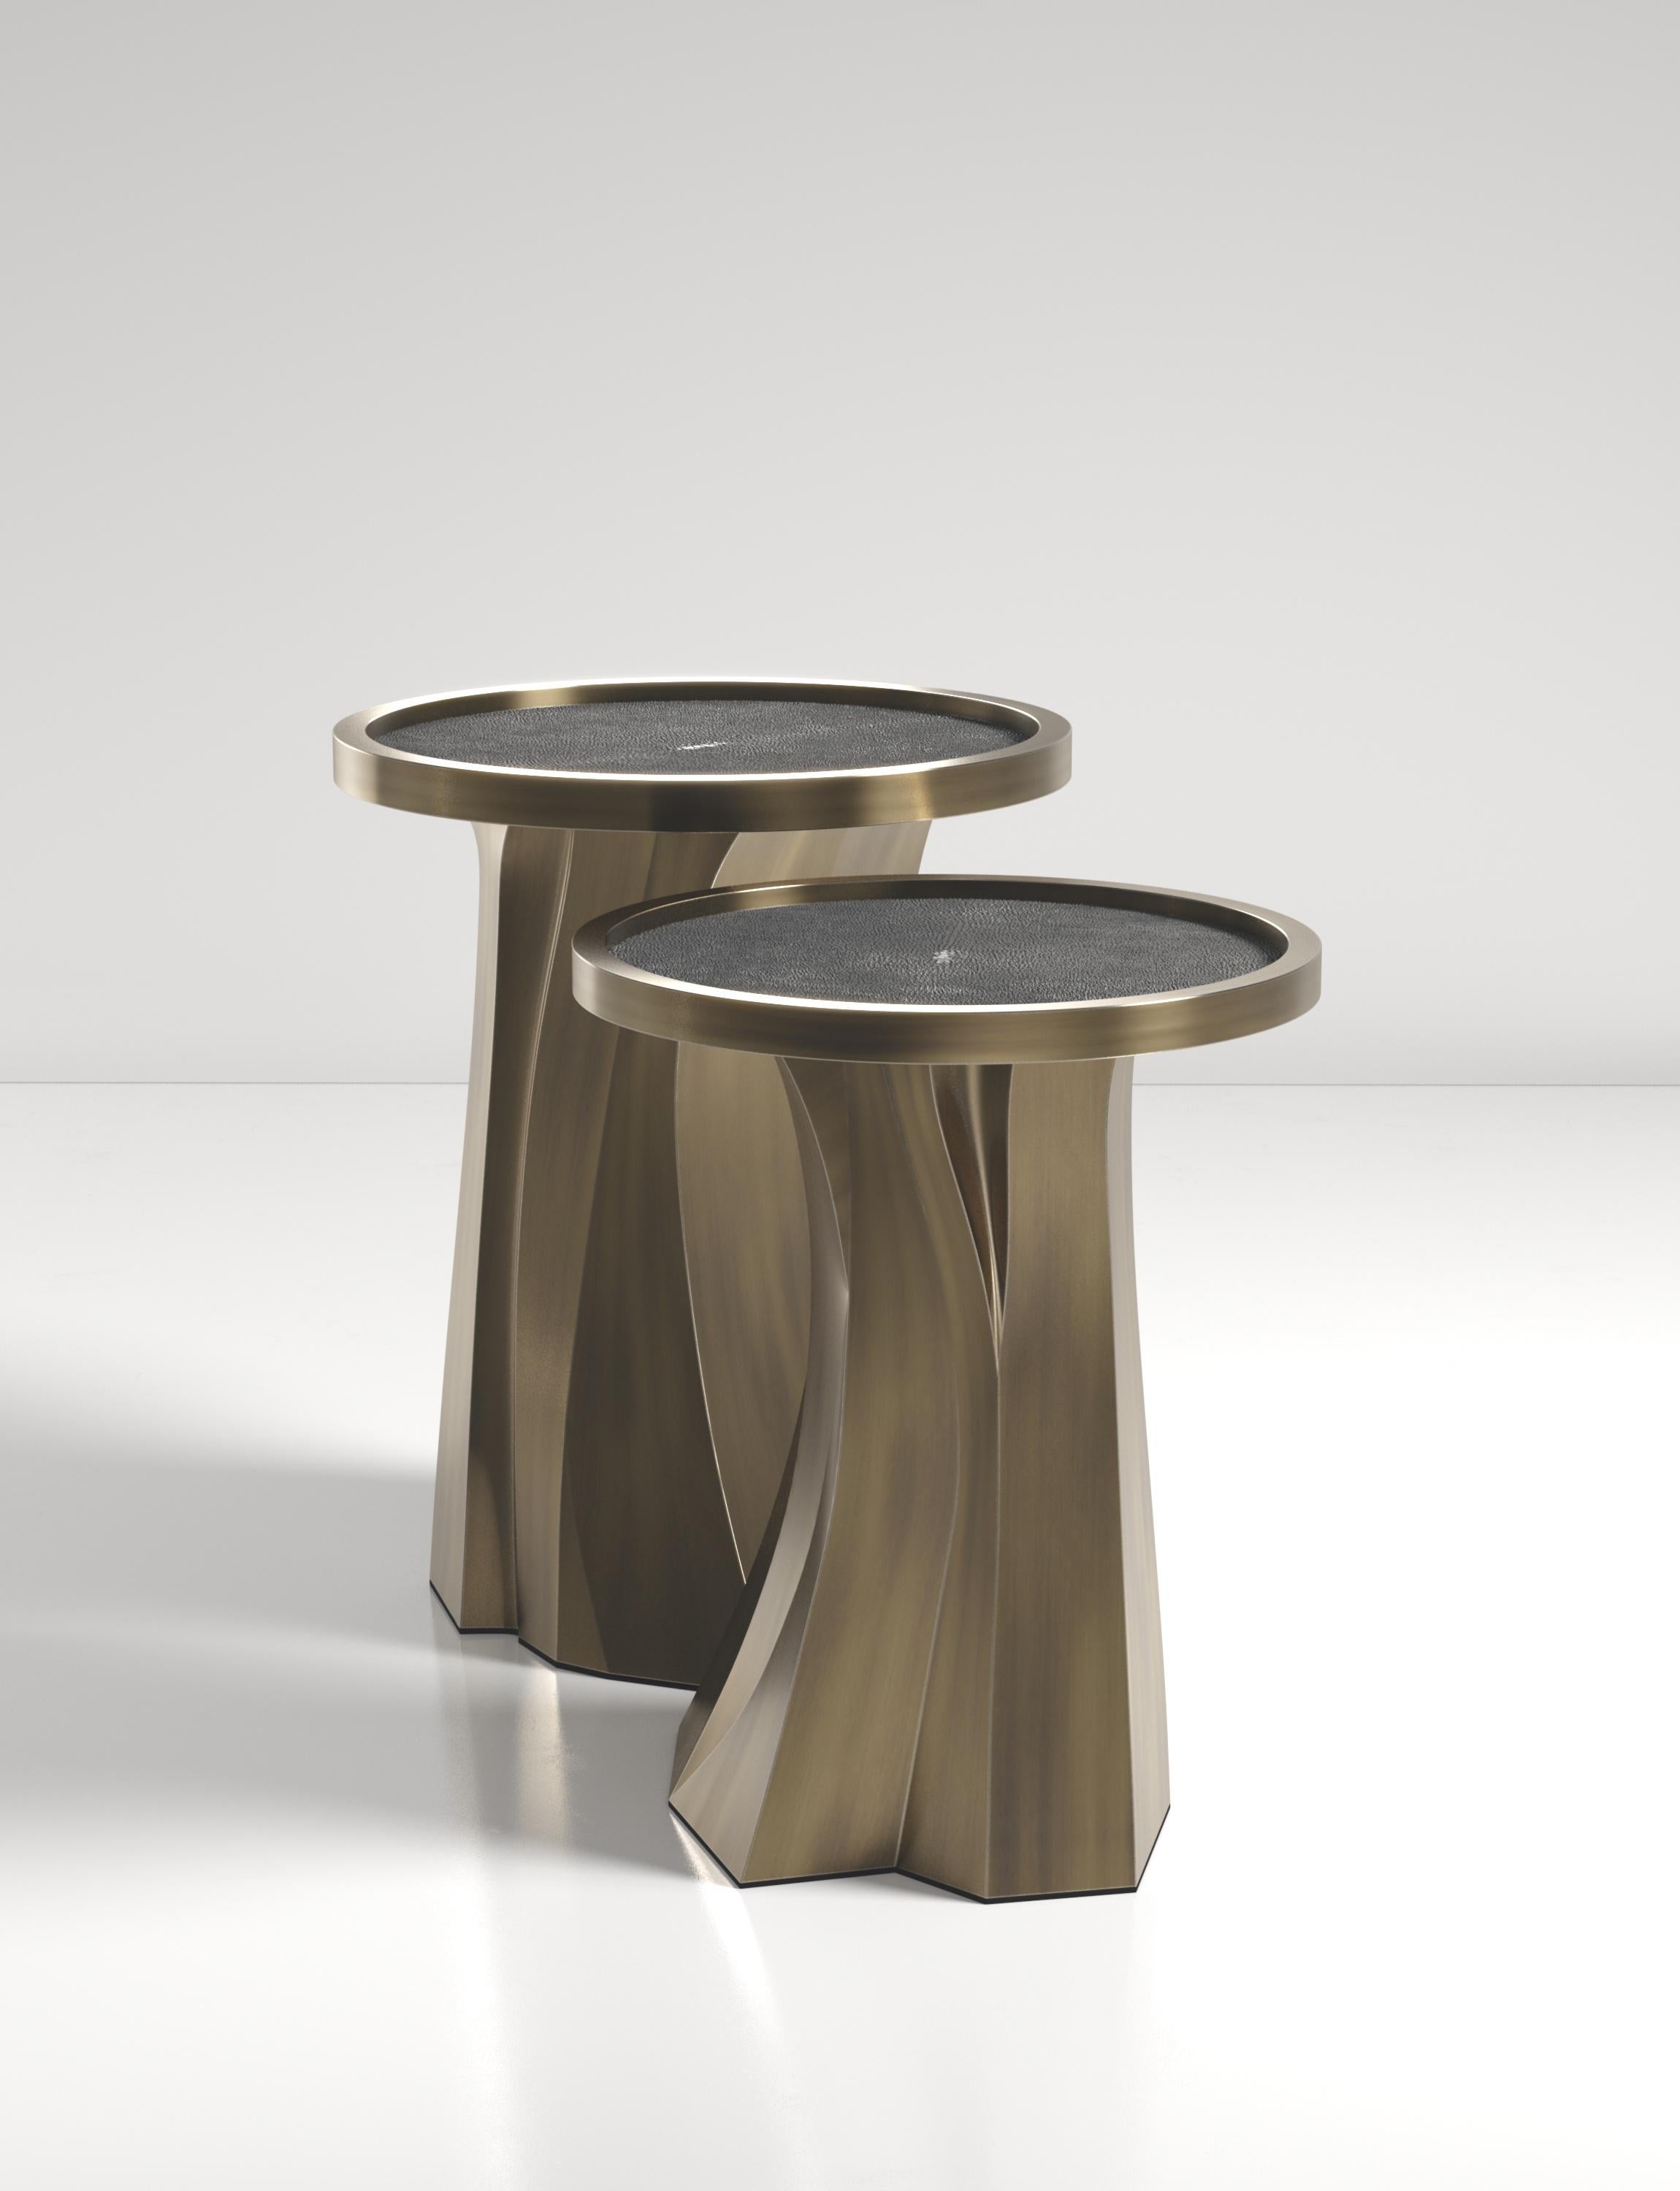 The Alma Nesting Tables by R&Y Augousti are sculptural and versatile pieces. The coal black shagreen inlaid top morphs into a dramatic hand-carved bronze-patina base. The grooves and details on the base allow the tables to have different expressions